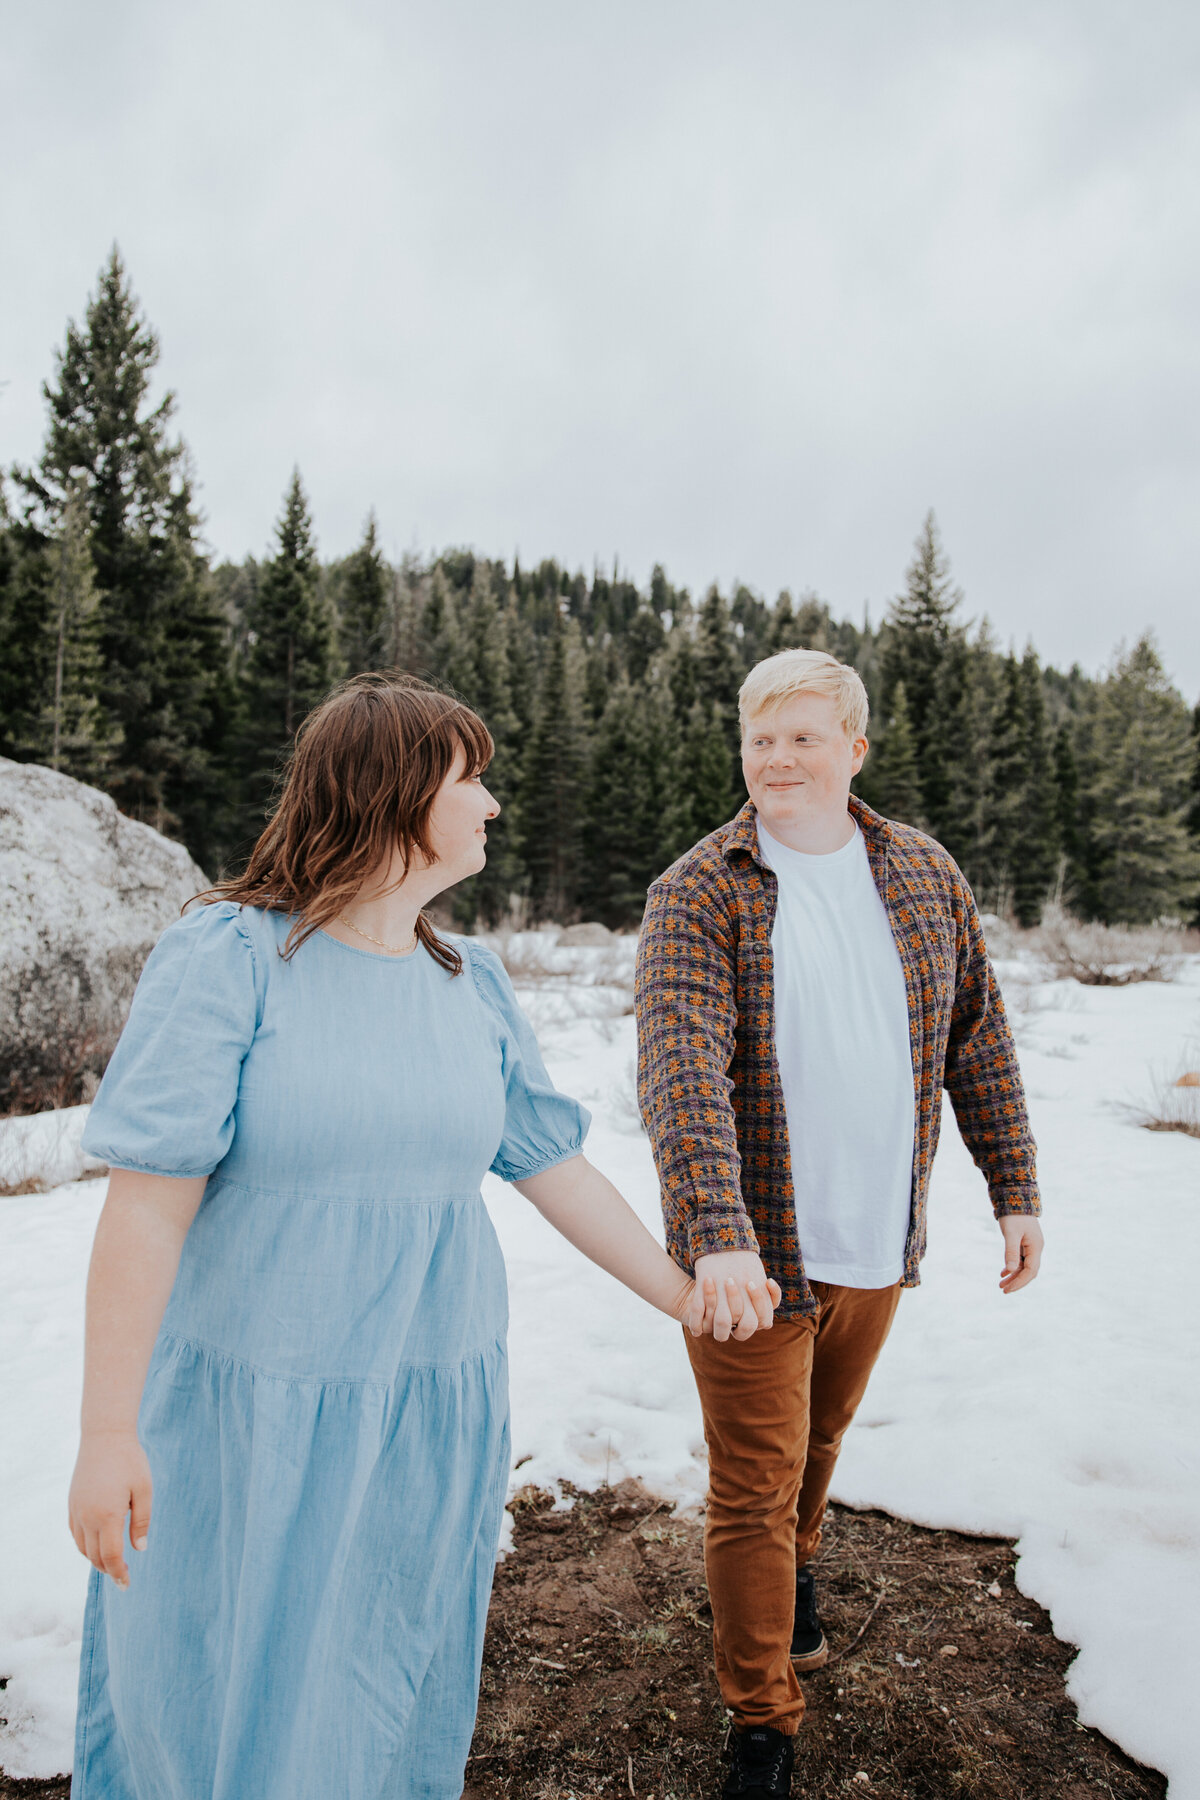 Idaho Falls wedding photographer captures engagement photos in the winter in the mountains with man and woman holding hands while walking out of the woods with snow on the ground